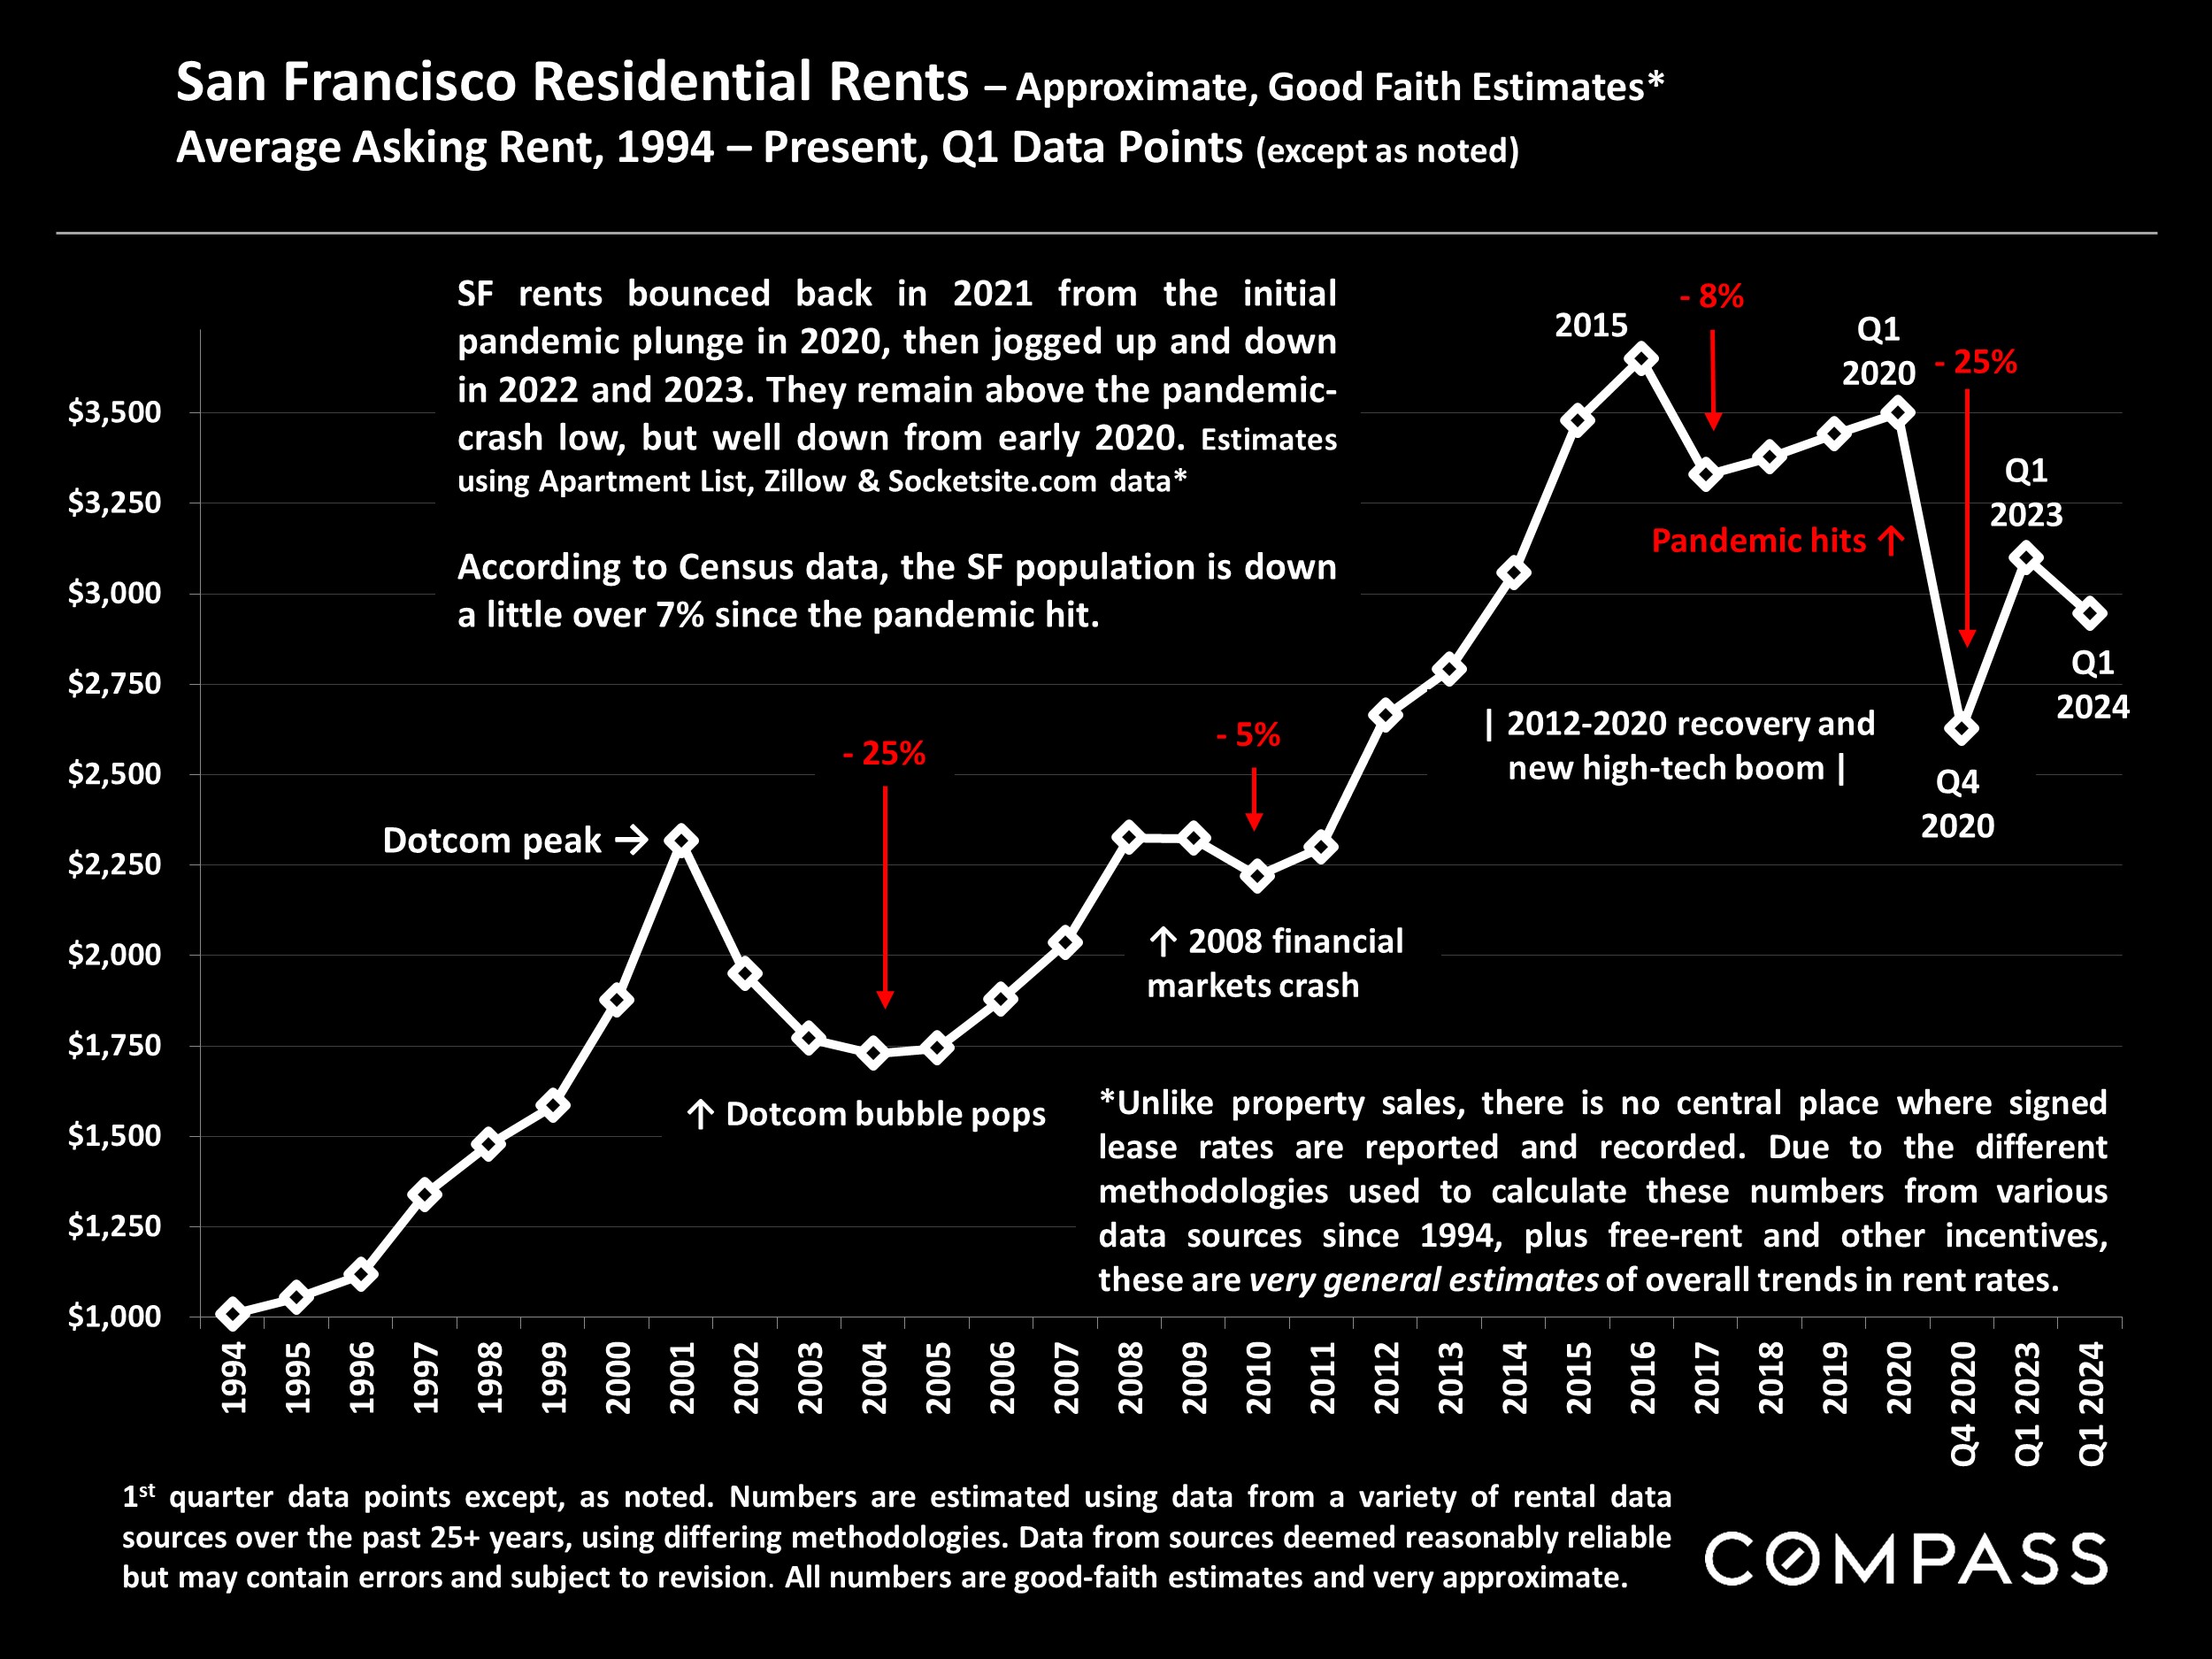 San Francisco Residential Rents - Approximate, Good Faith Estimates* Average Asking Rent, 1994 - Present, Q1 Data Points (except as noted)